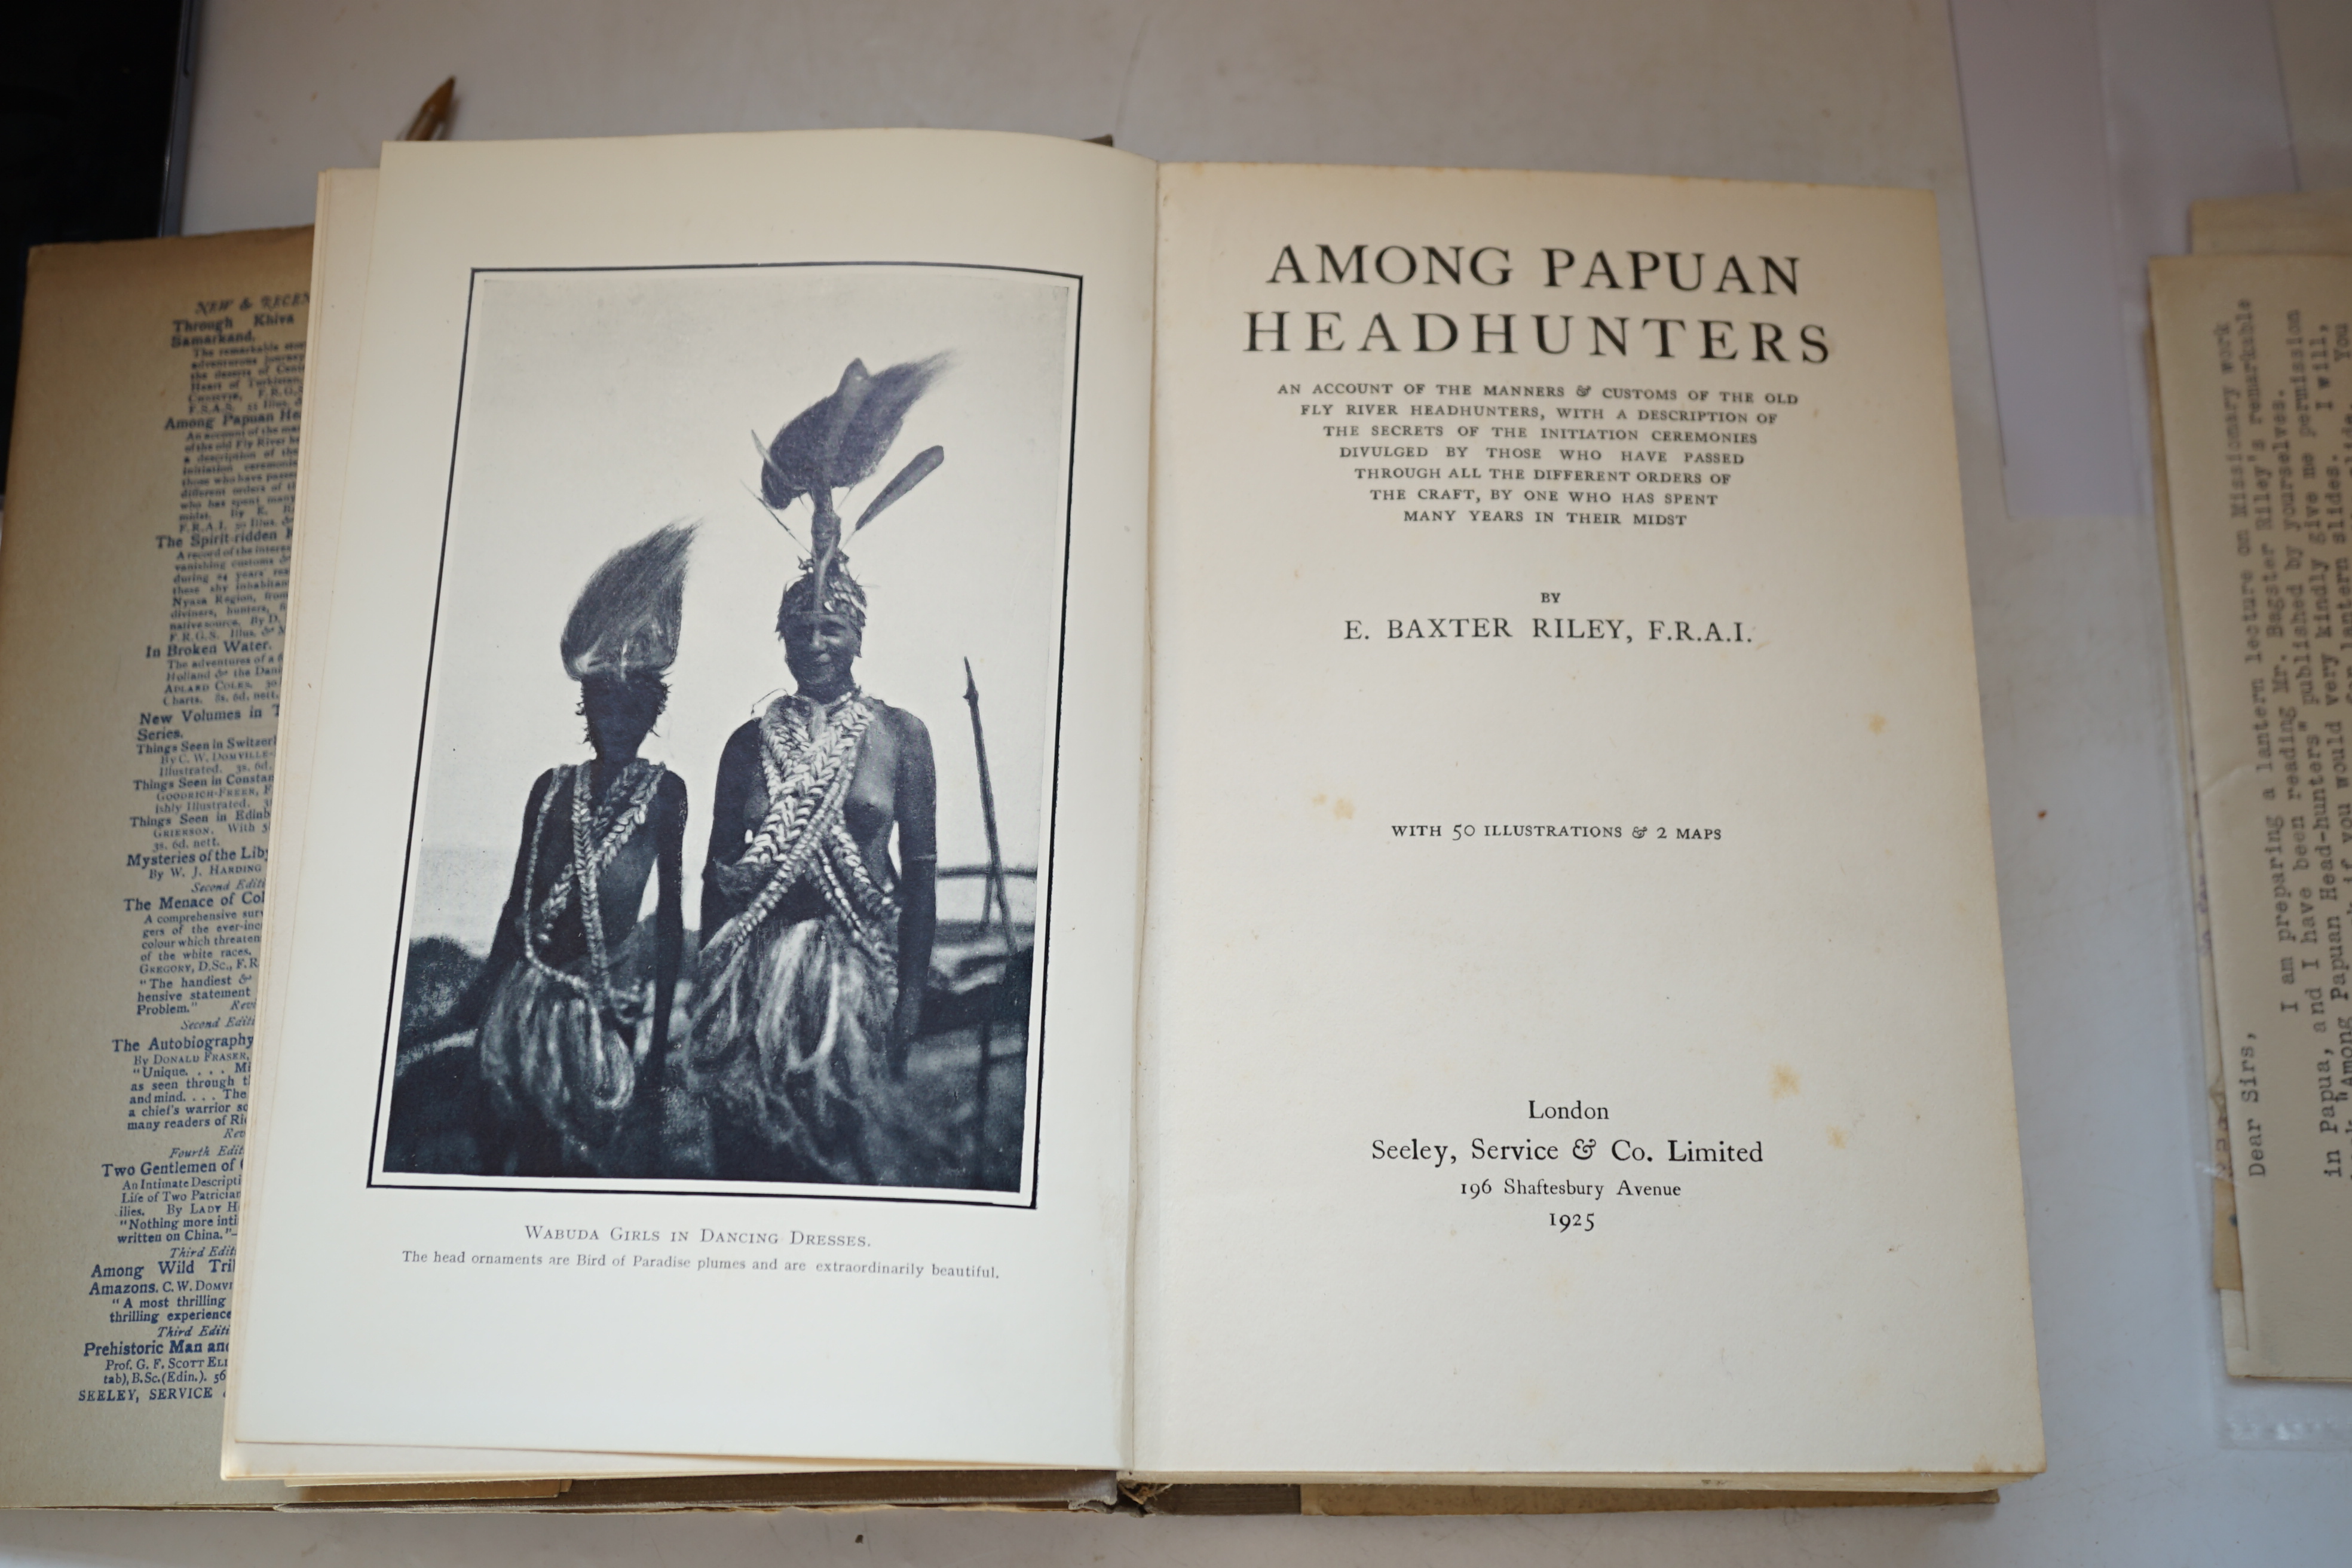 Riley, E.Baxter - Among Papuan Headhunters. An account of the manners and customs of the old Fly river headhunters, with a description of the secrets of the initiation ceremonies divulged by those who have passed through